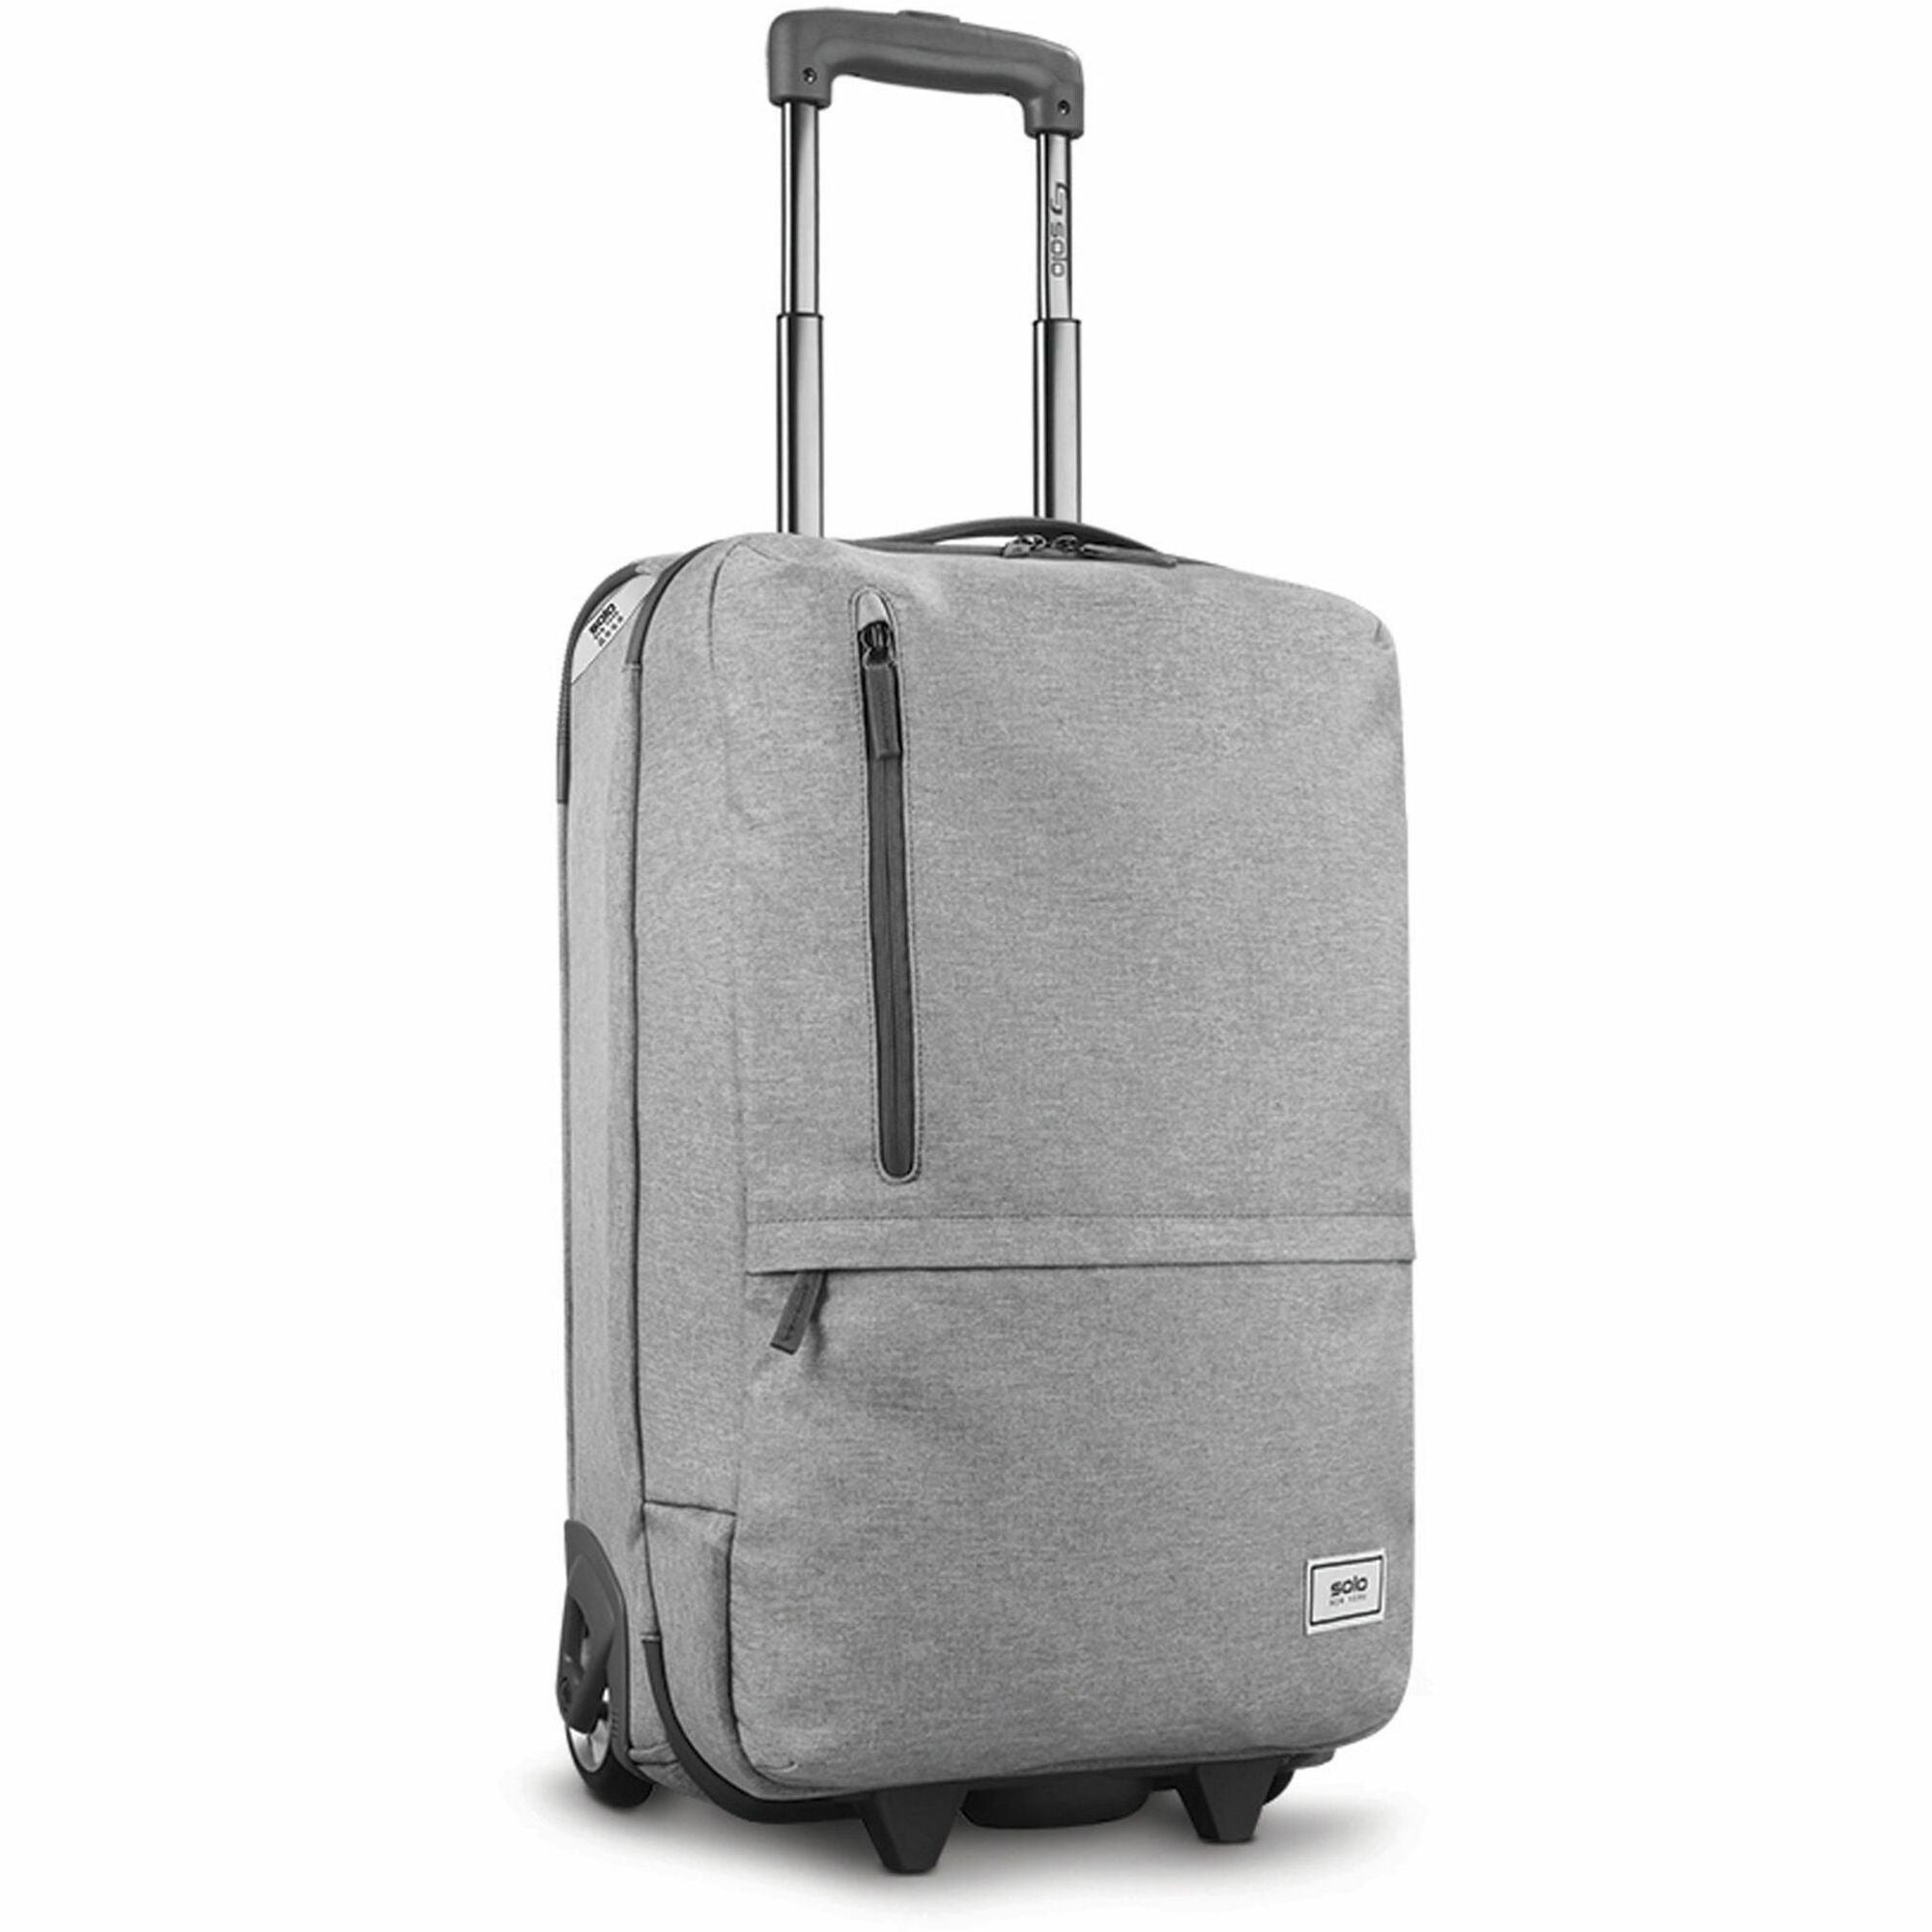 solo-retreat-travel-luggage-case-carry-on-luggage-travel-essential-gray-handle-22-height-x-14-width-x-7-depth-1-each_uslubn91410 - 1